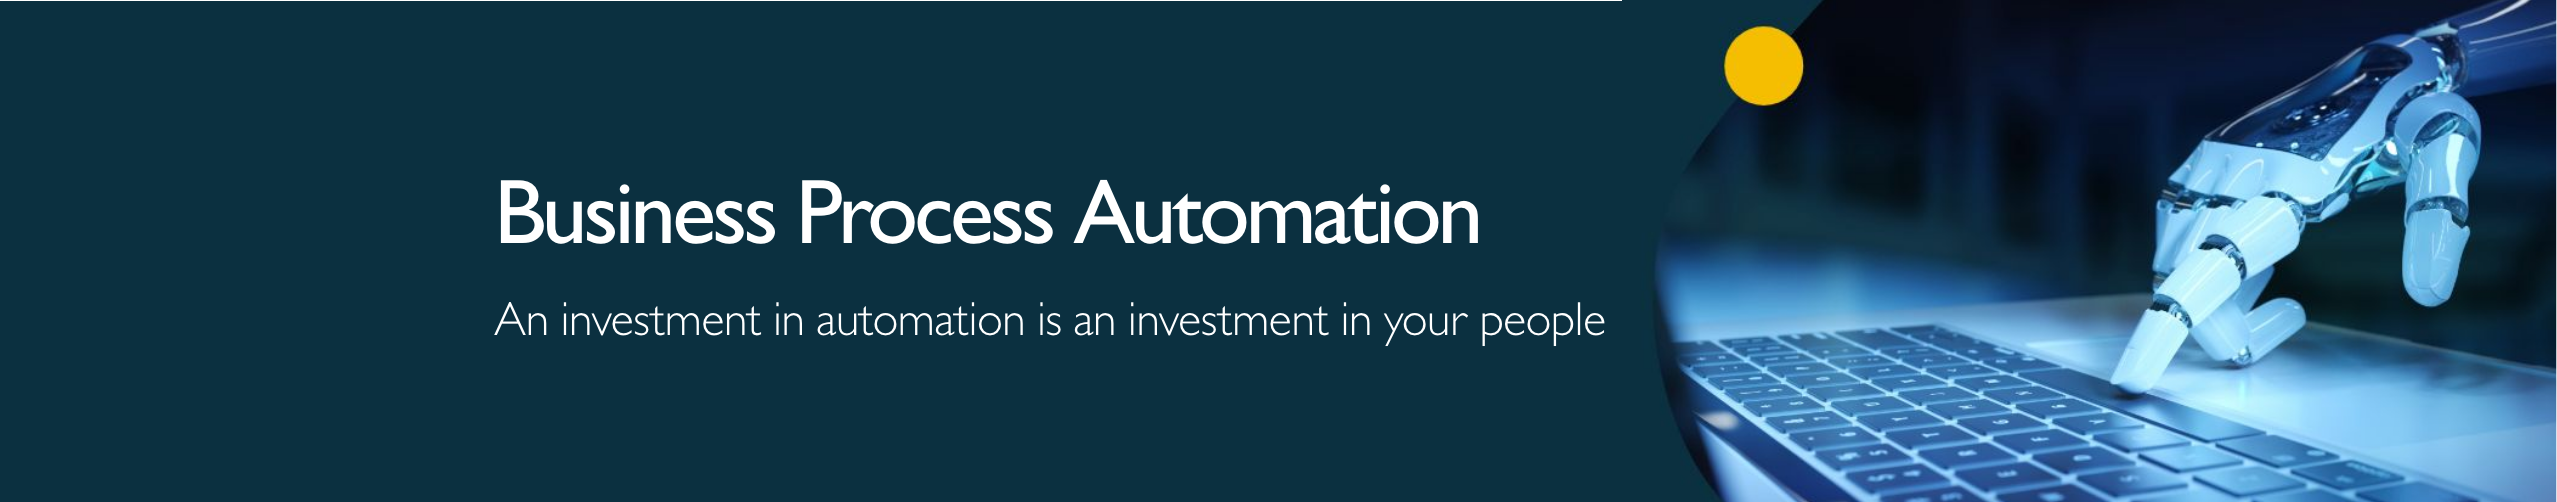 Business Process Automation Banner